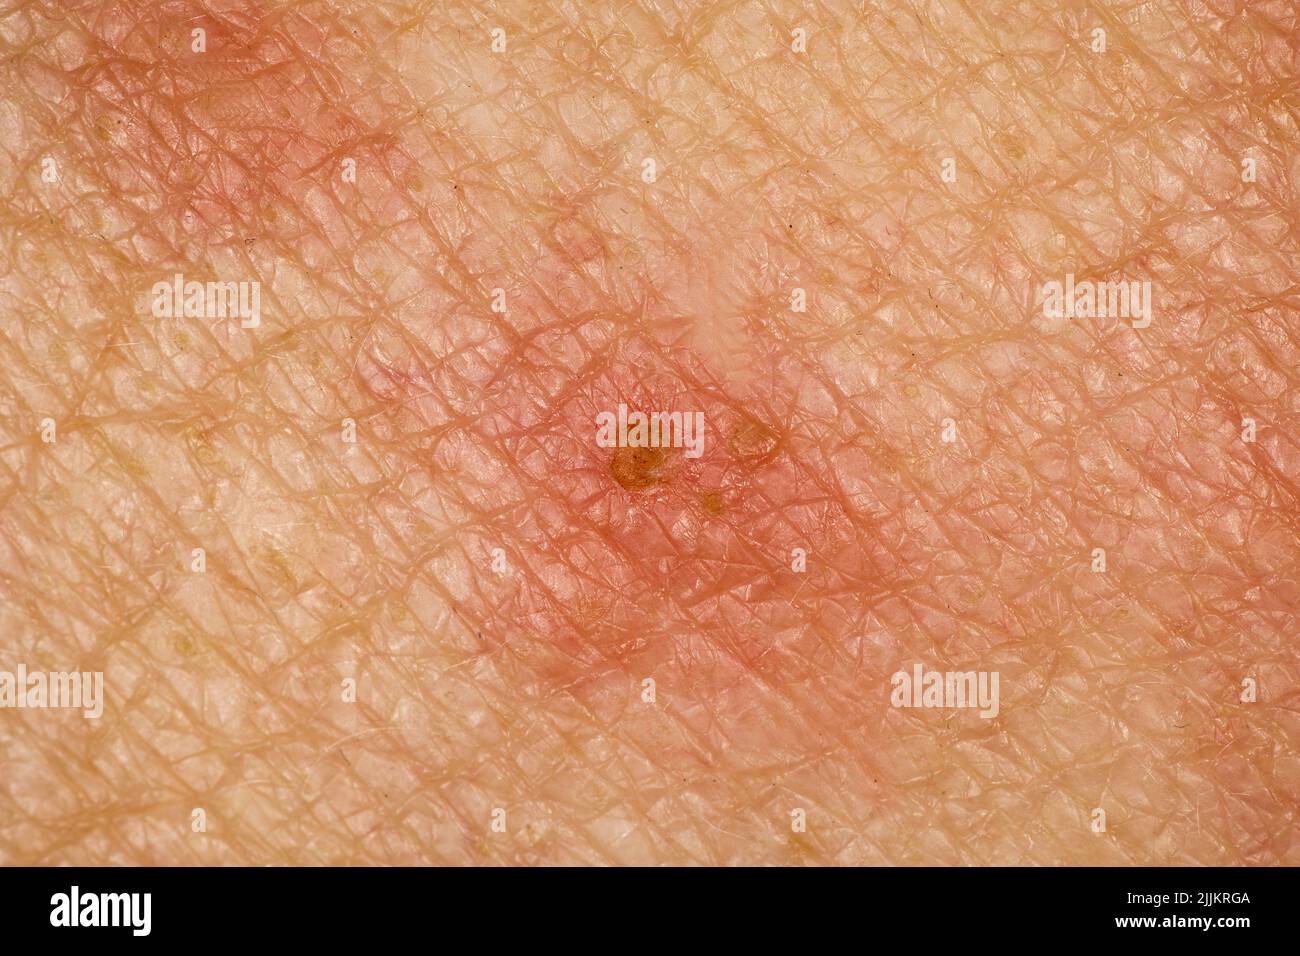 Shingles, Herpes Zoster, Germany Stock Photo